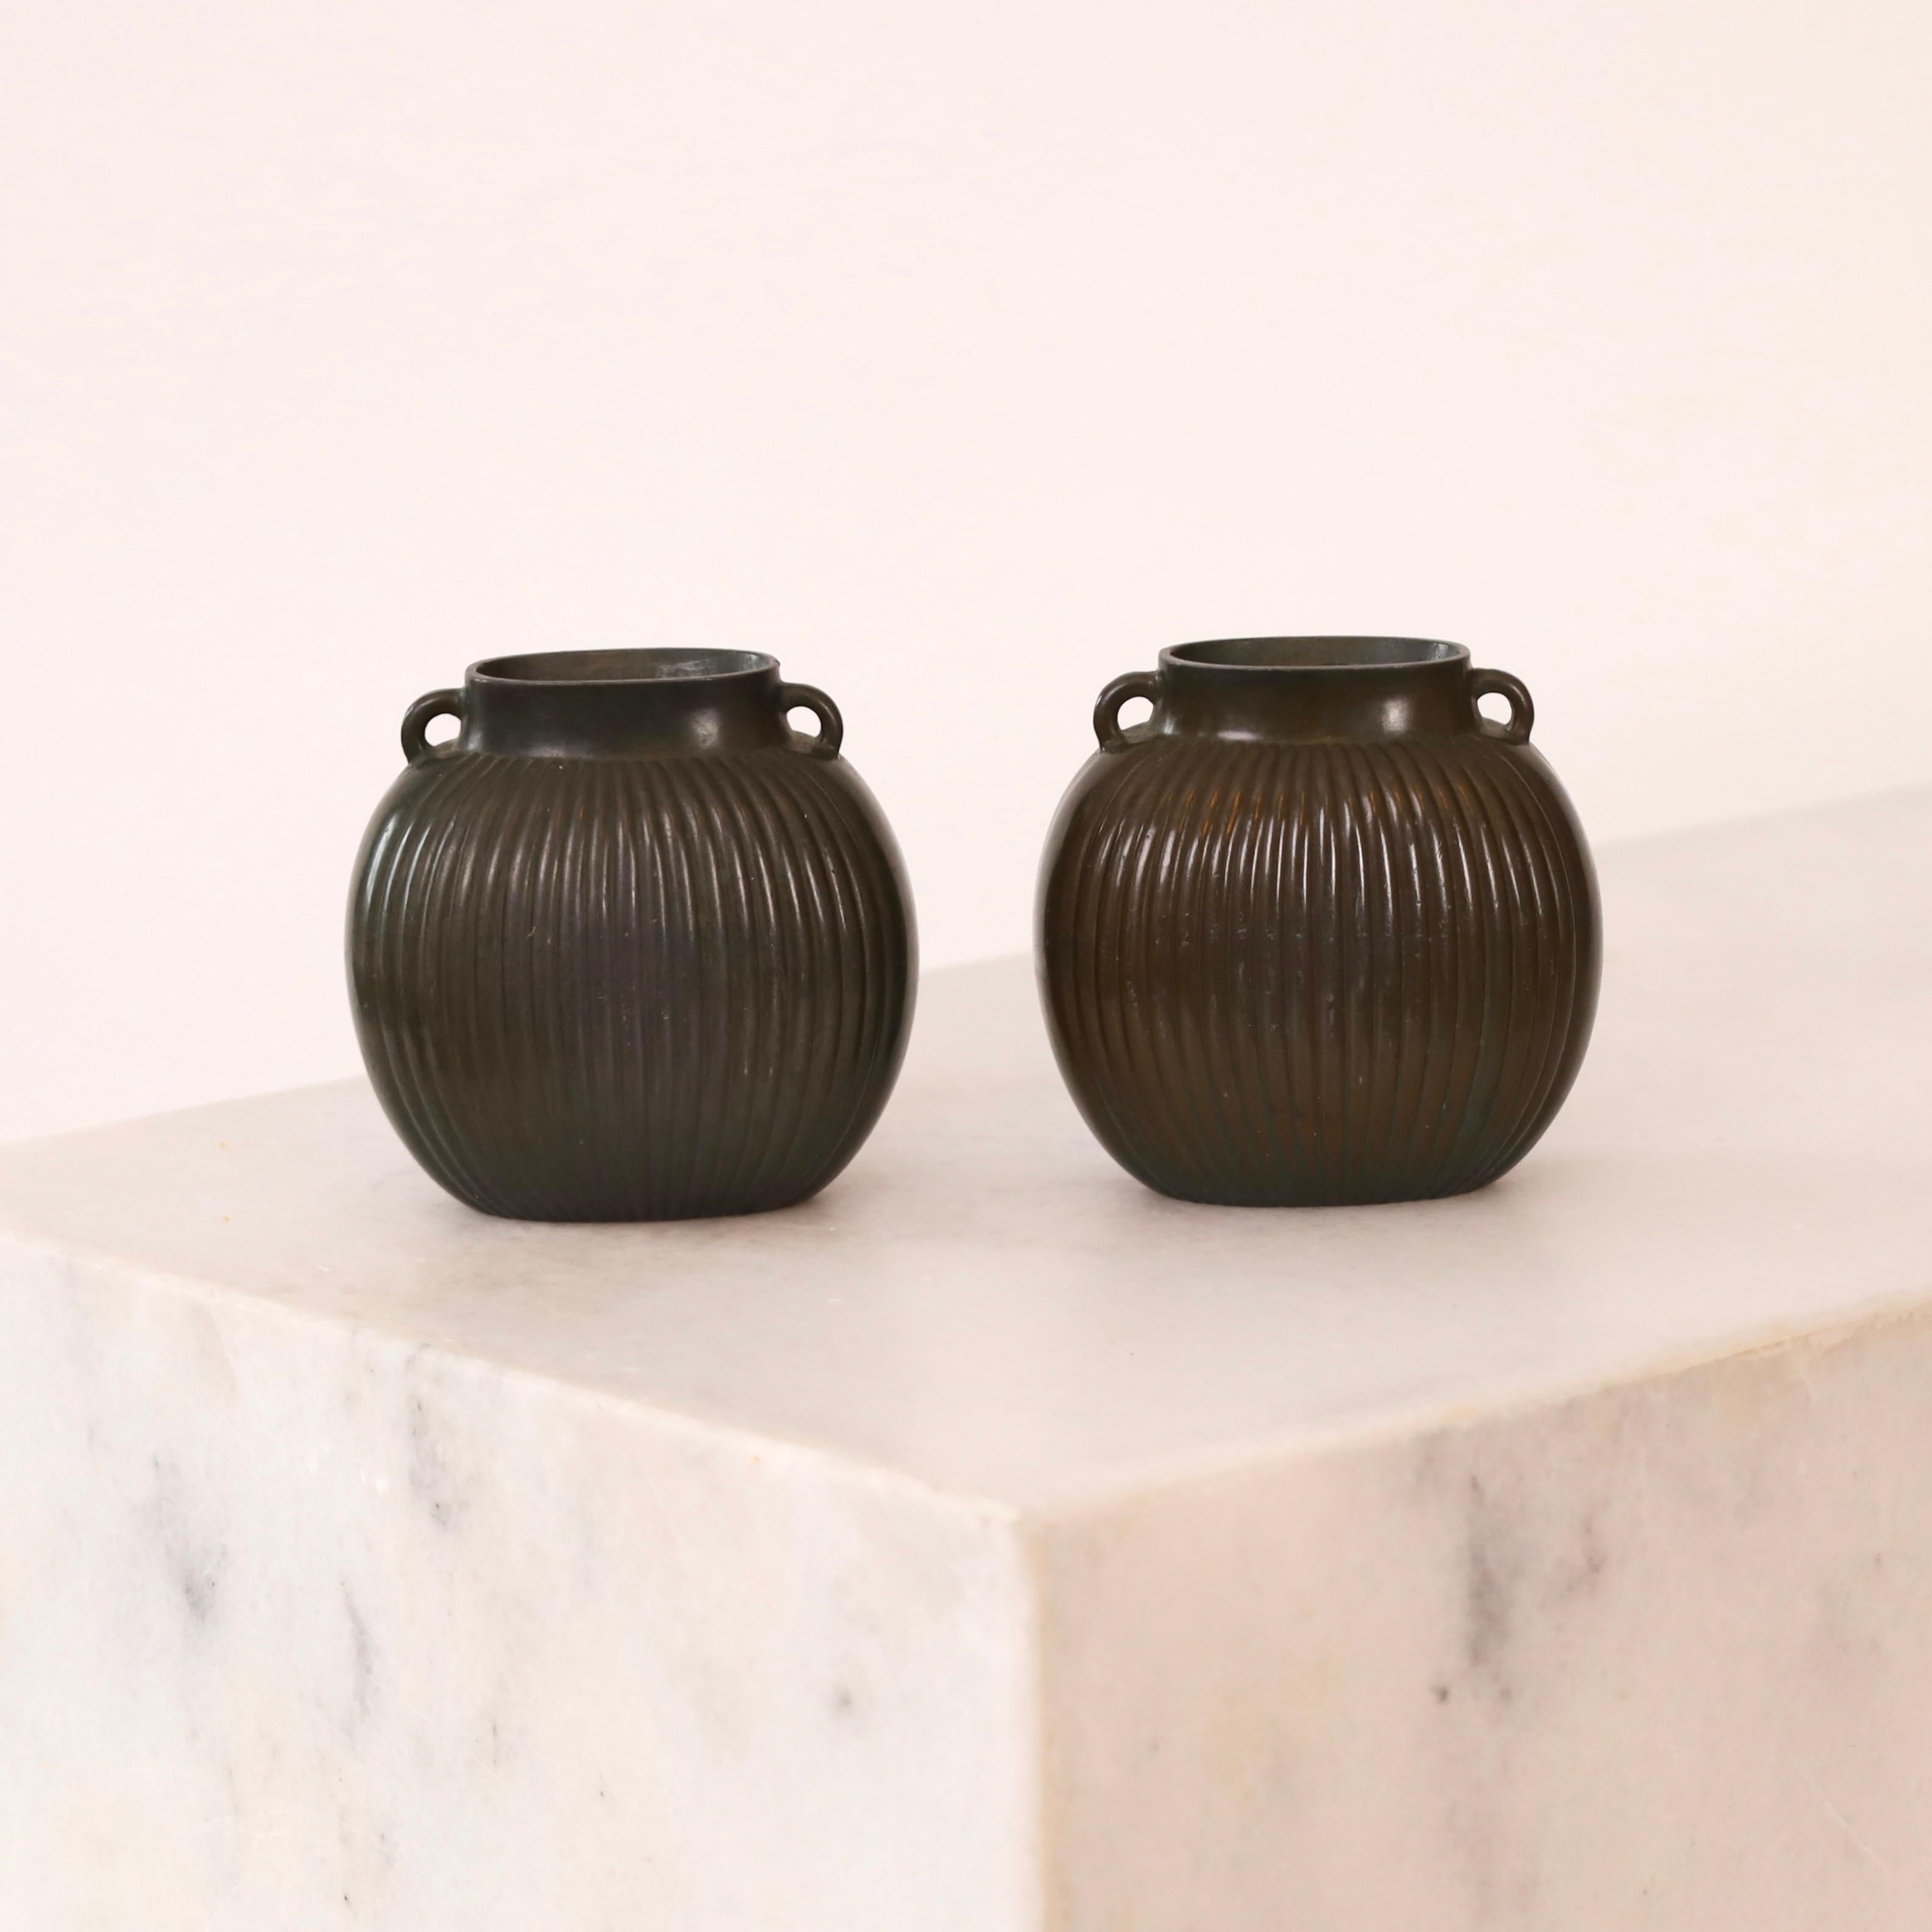 A set of small 1930s metal vases by Just Andersen.  A fine set for a beautiful place.

* A pair (2) of miniature metal vases with vertical lines and lugs
* Designer: Just Andersen
* Style: 1758 (stamped 'Just 1758')
* Year: 1935 
* Condition: Good